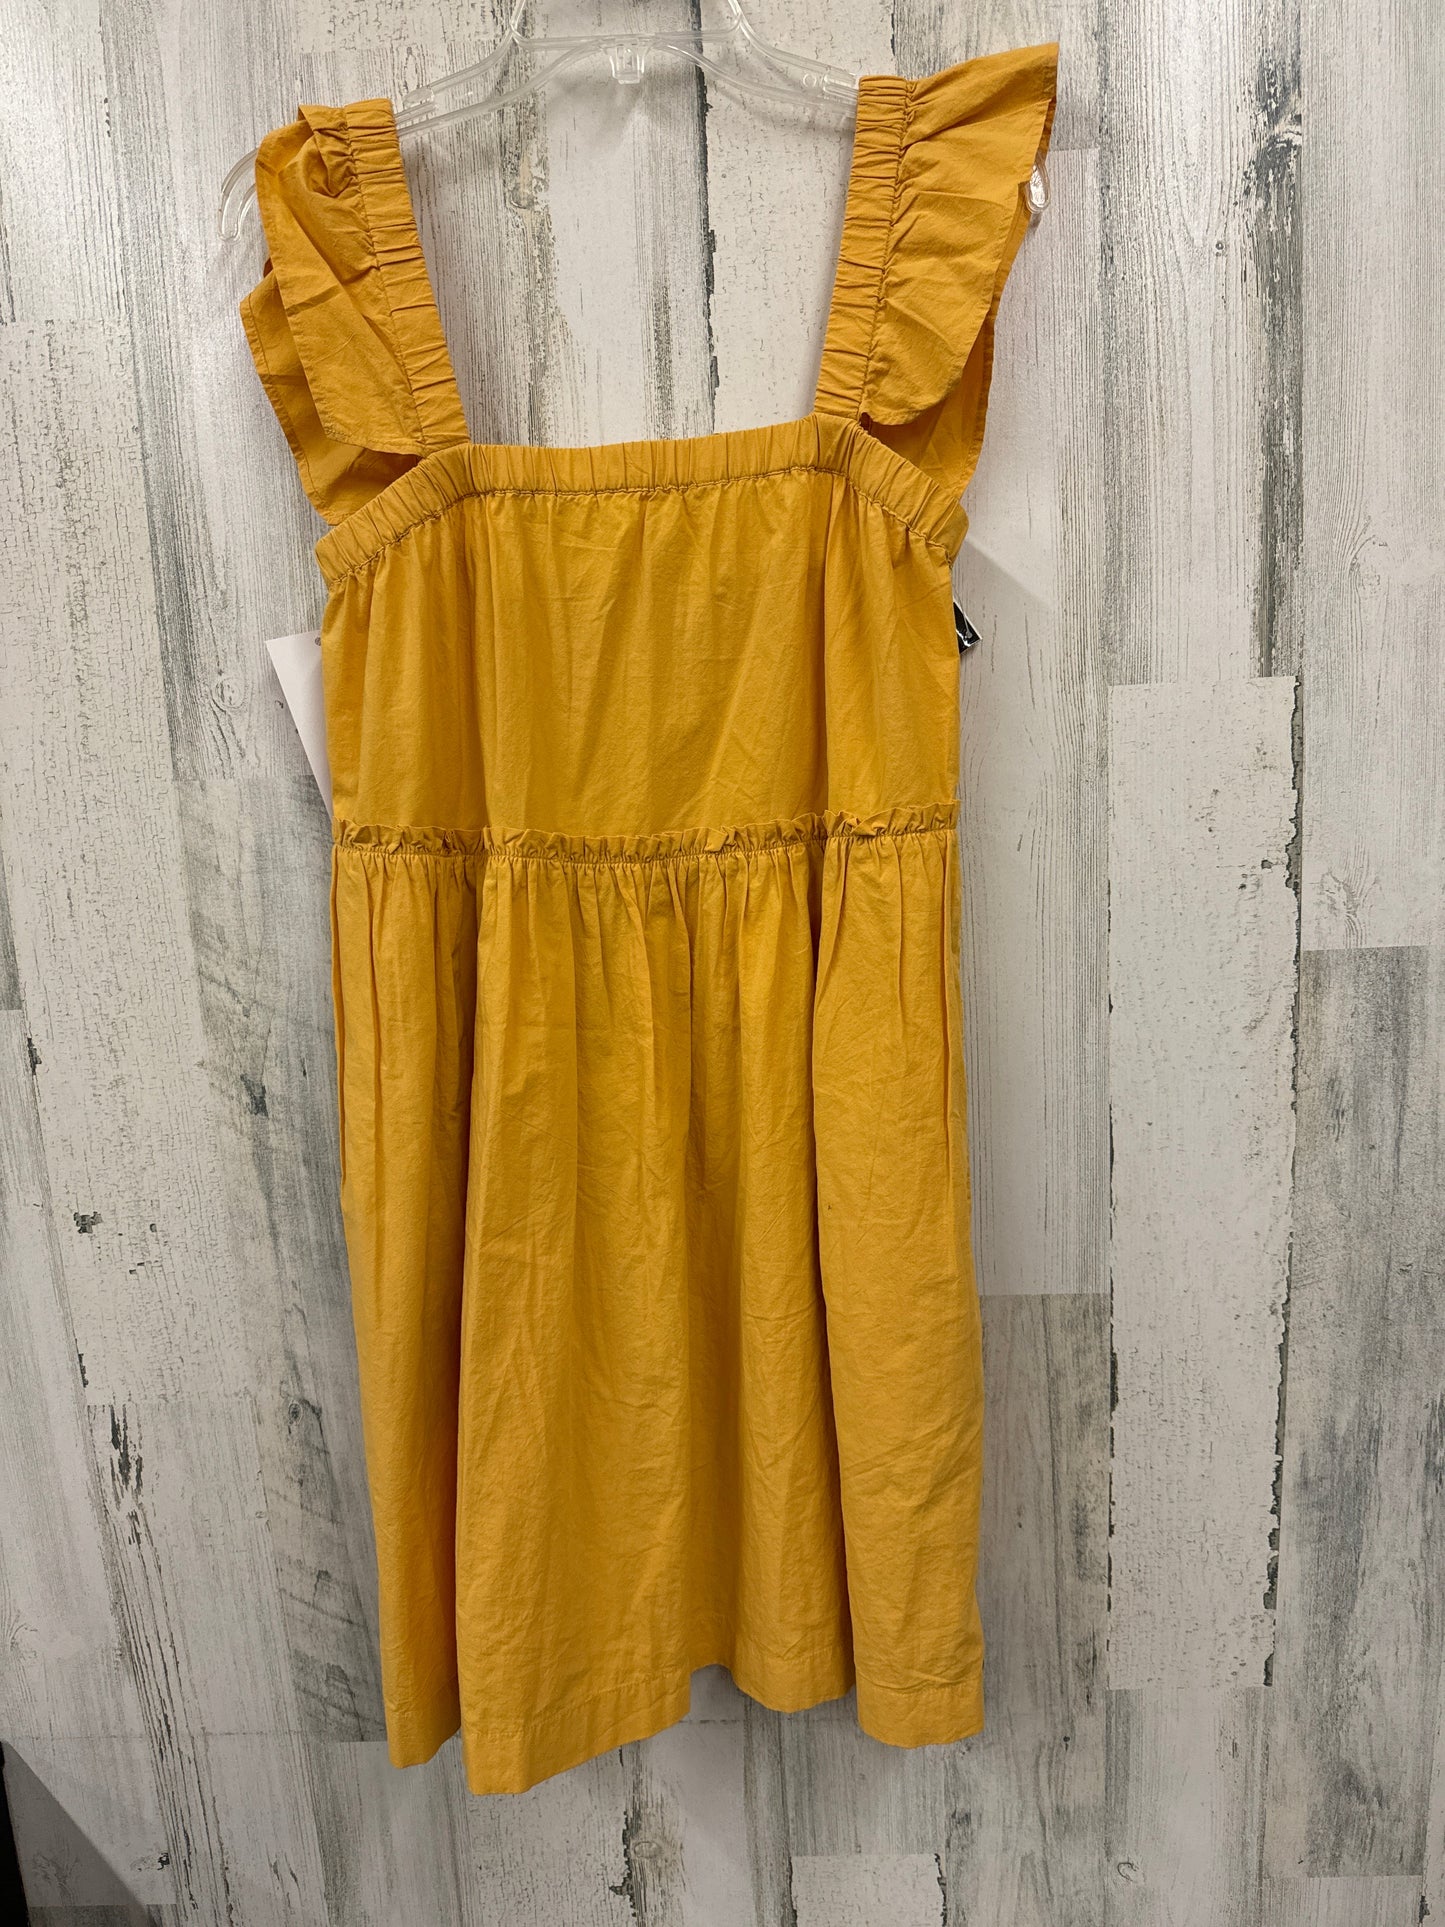 Yellow Dress Casual Short Madewell, Size S